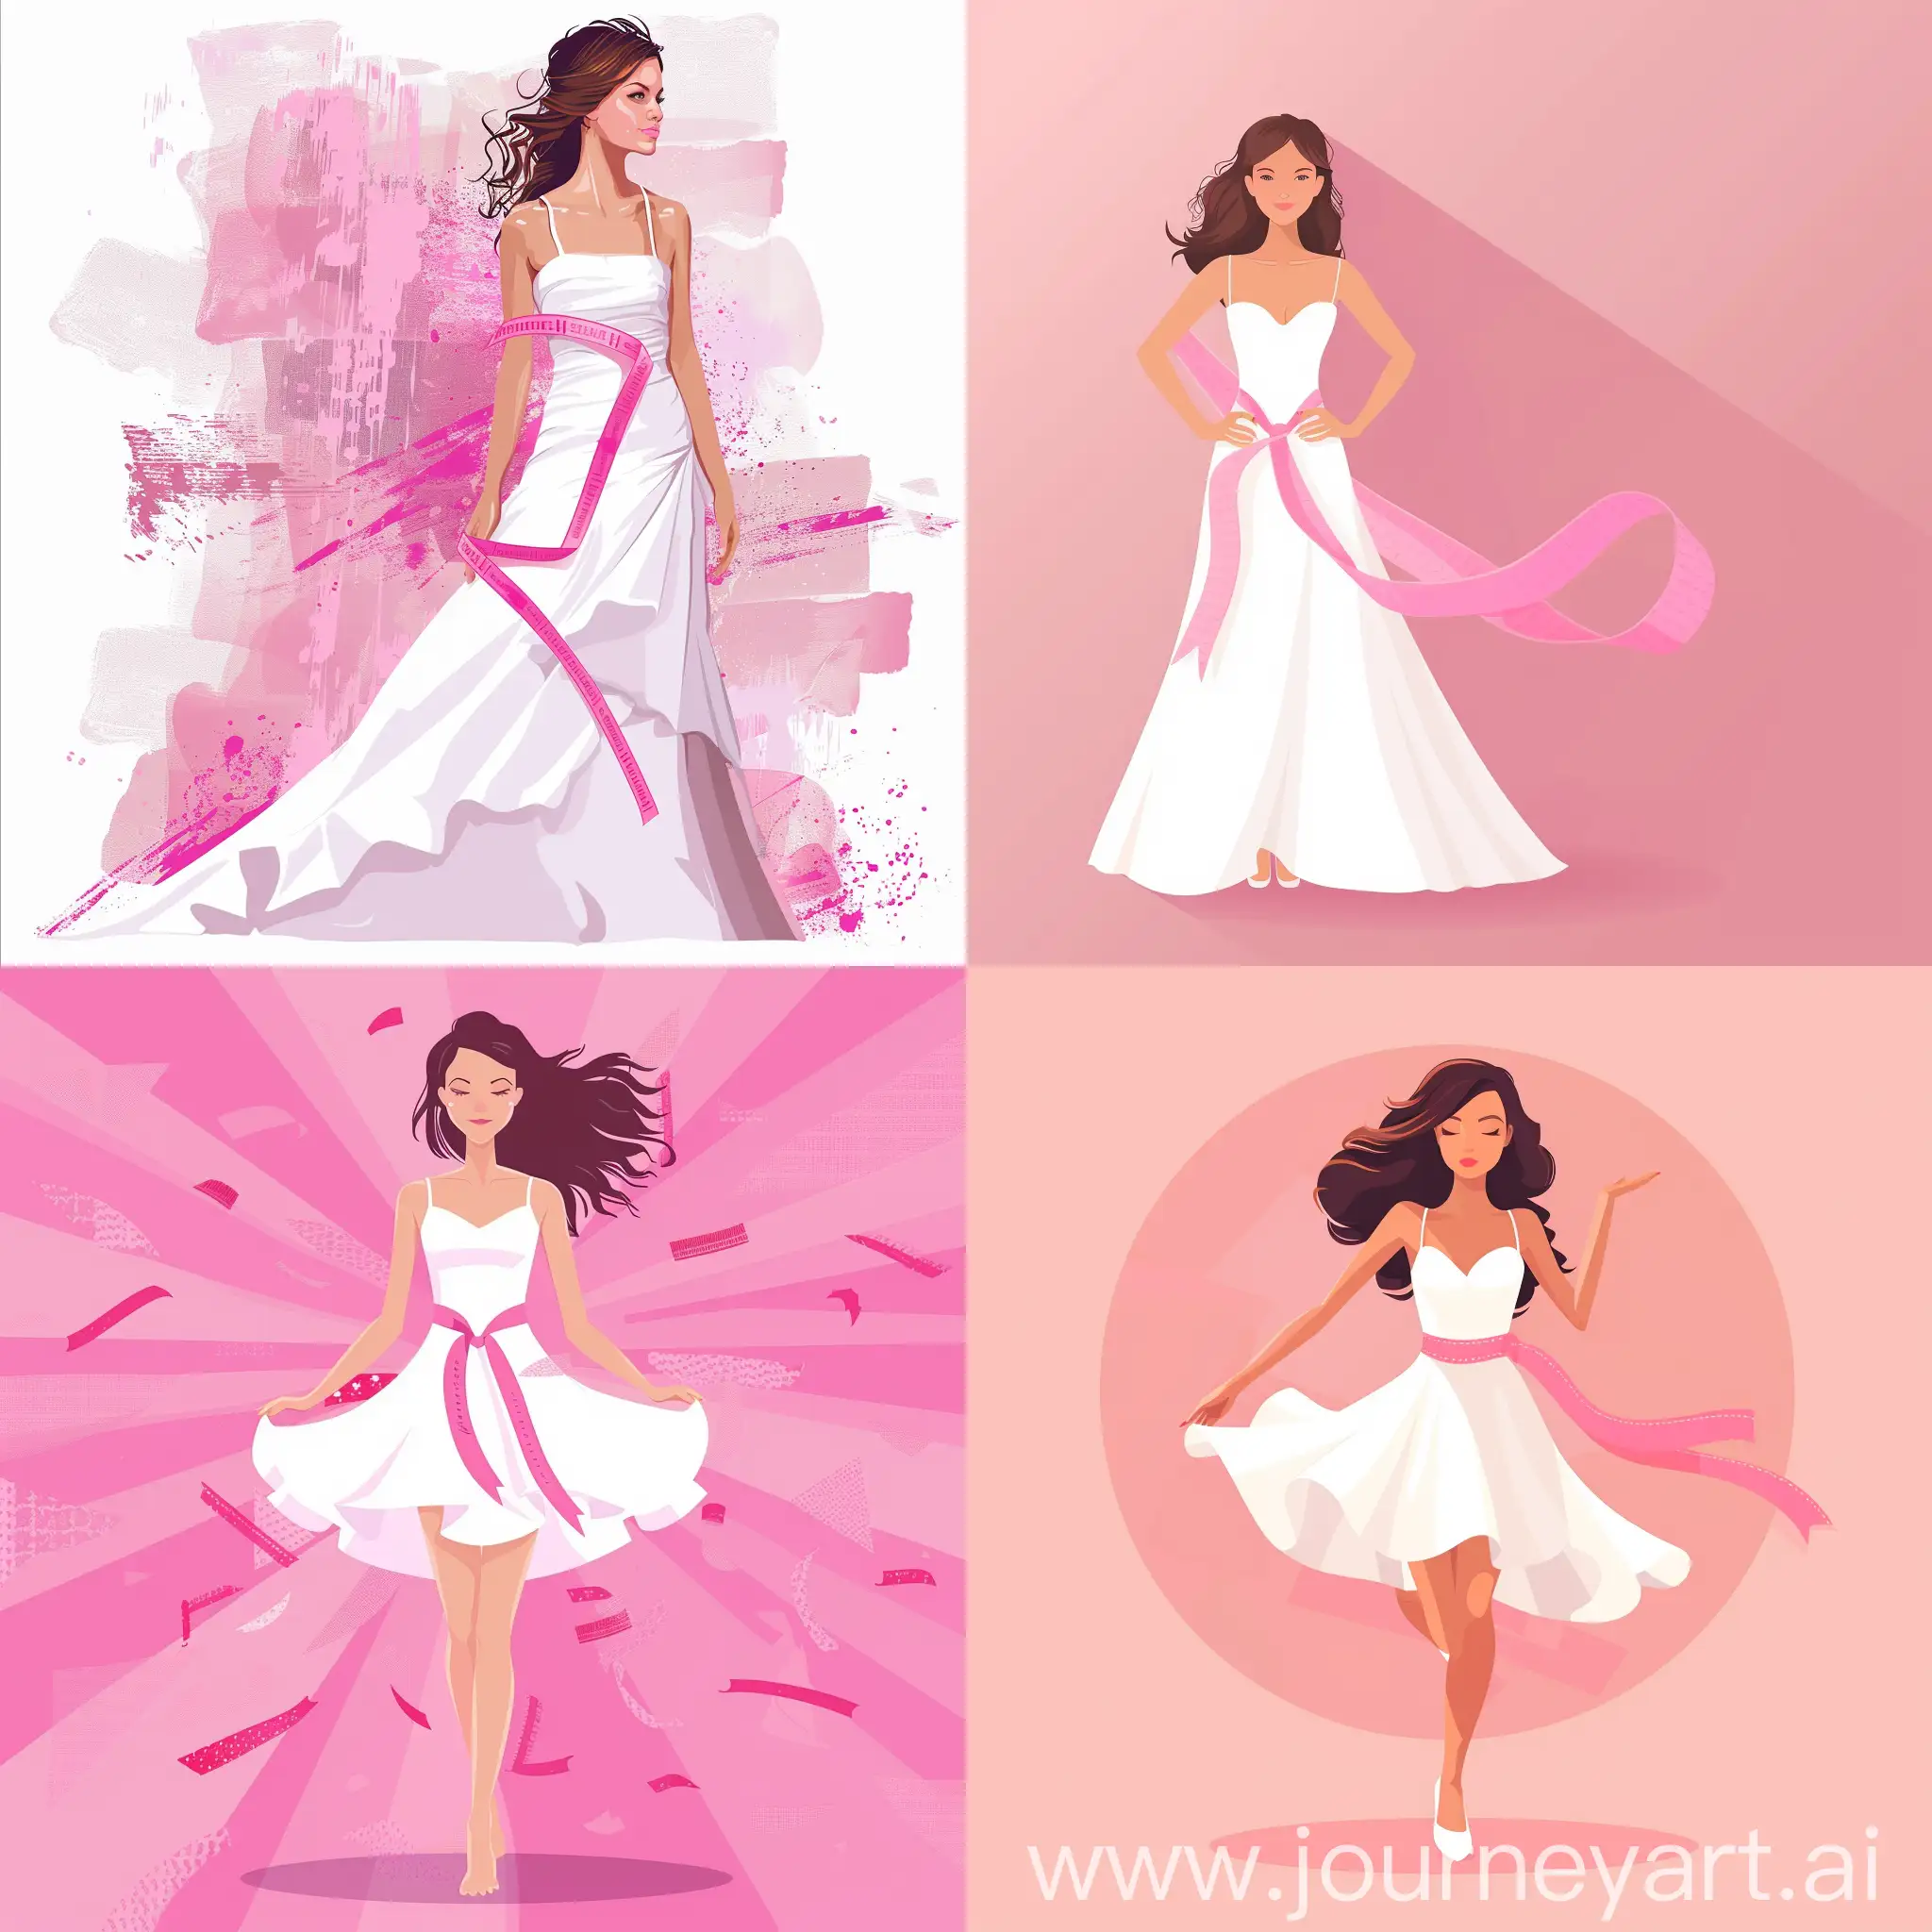 Victorious-Elegance-Minimalist-Illustration-of-a-Girl-in-White-Dress-with-Pink-Ribbon